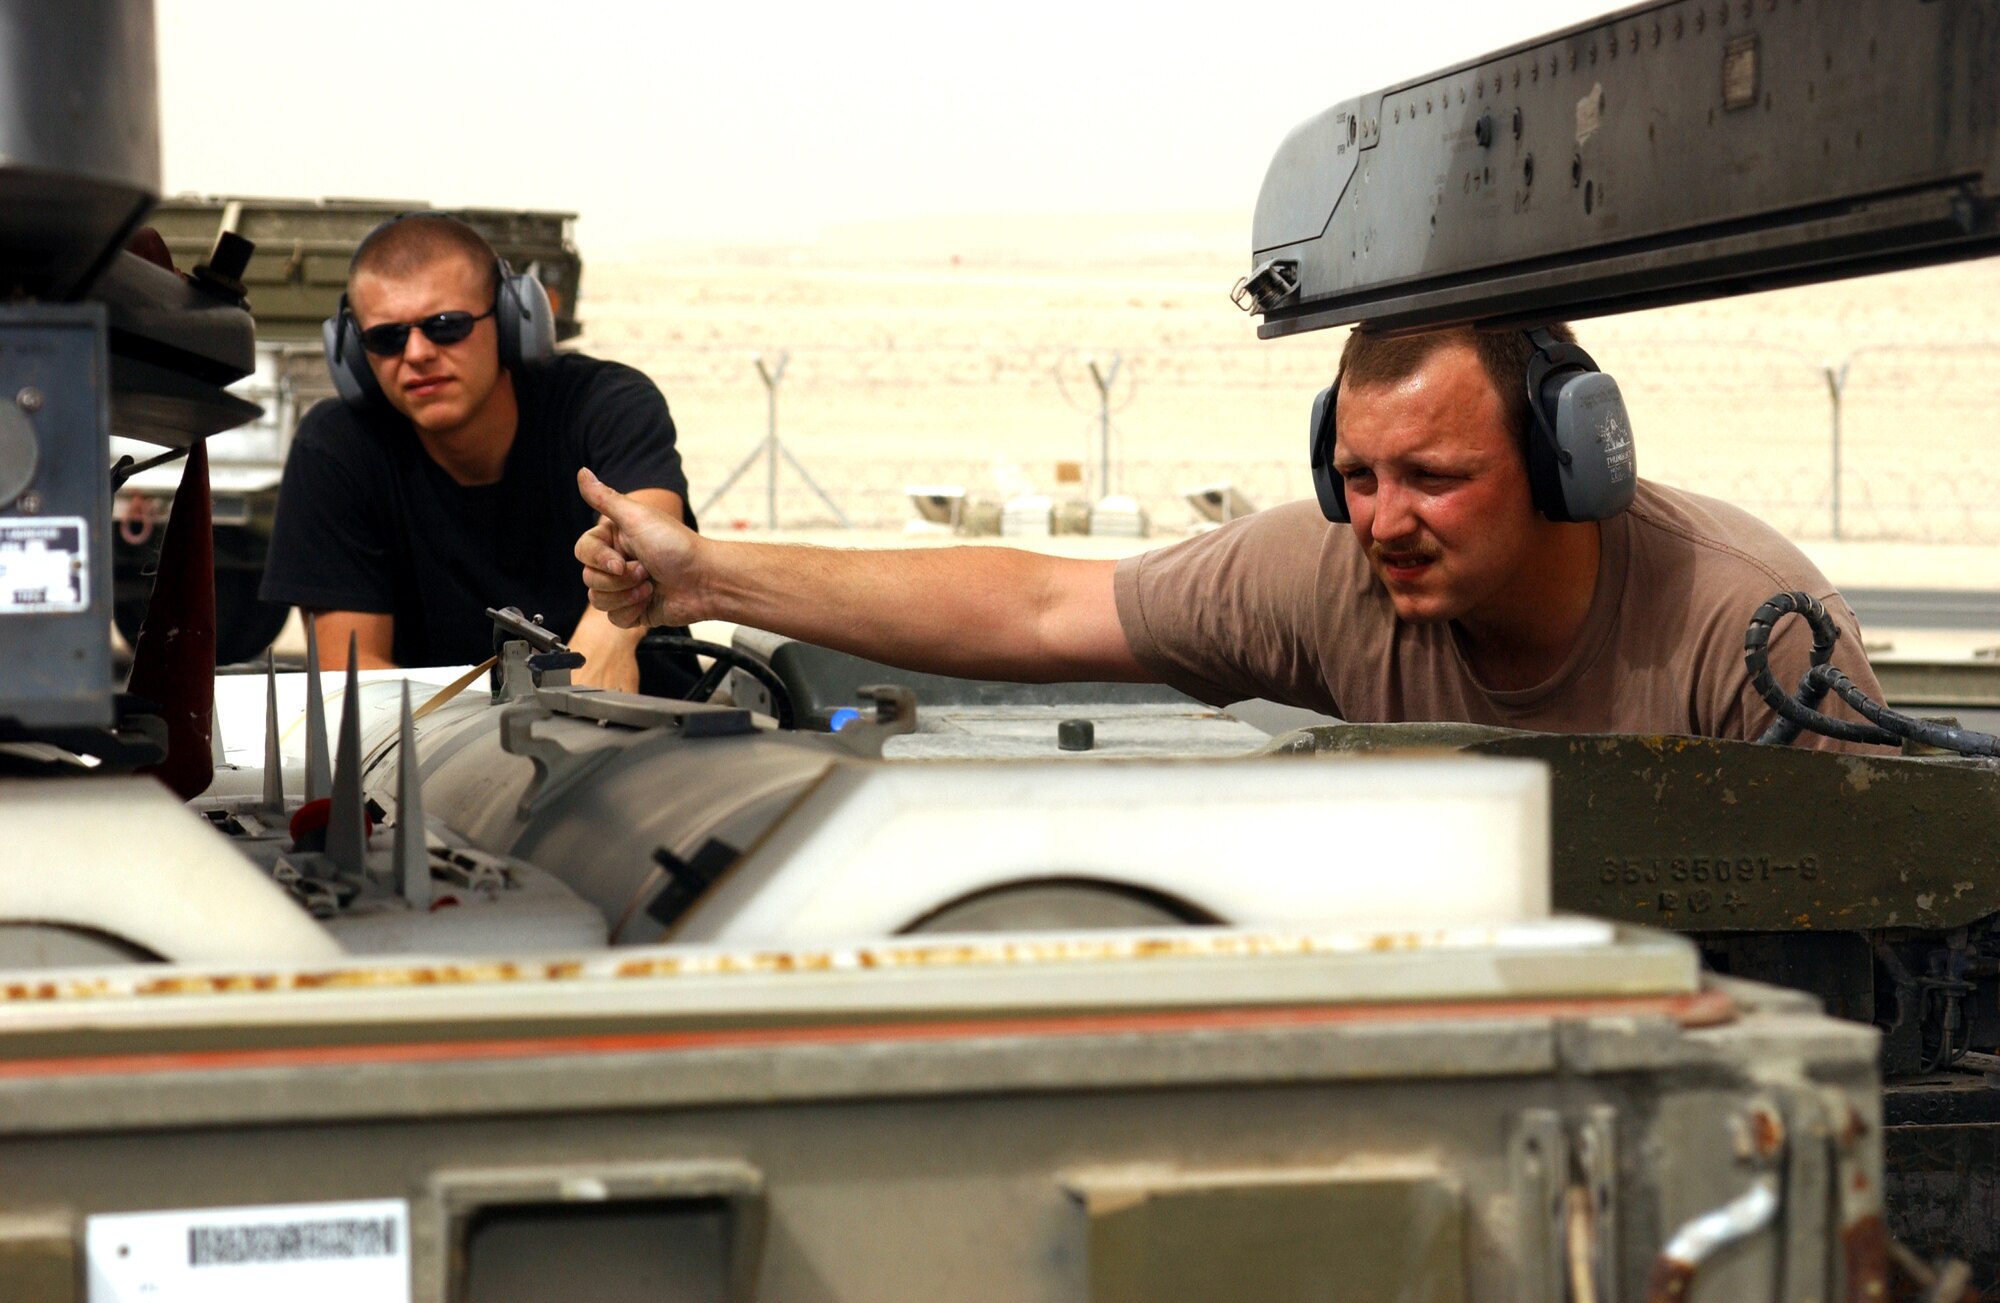 OPERATION IRAQI FREEDOM -- Airman 1st Class Michael Gucciardi drives the jammer while Staff Sgt. David Ross gives hand signals indicating which direction to move the missile while loading on a F-16CJ at a forward deployed location in Southwest Asia.(U.S. Air Force photo by Master Sgt. Terry L. Blevins)